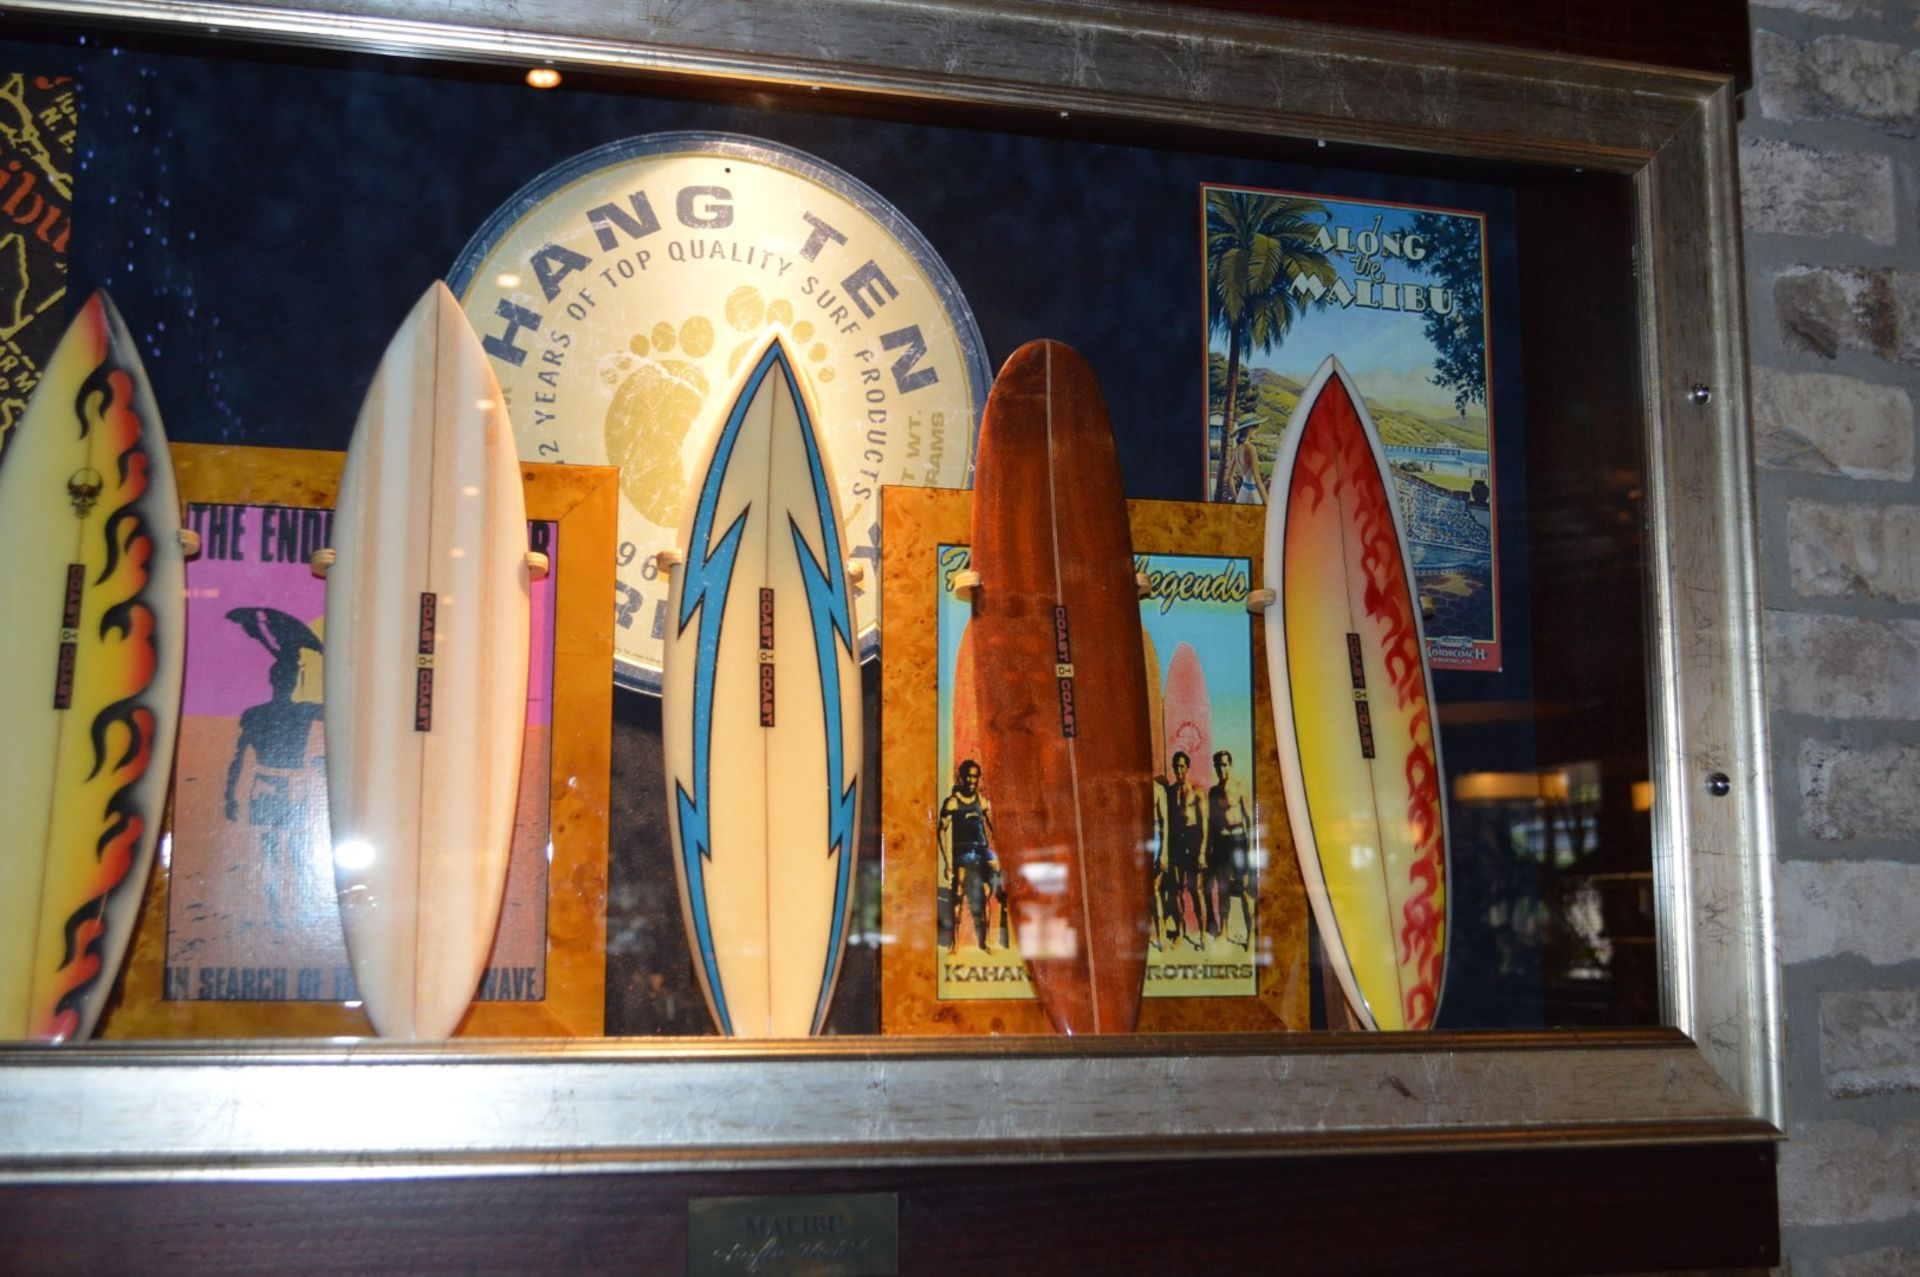 1 x Americana Wall Mounted Illuminated Display Case - MALIBU SURFIN USA - Includes Various Images, - Image 2 of 5